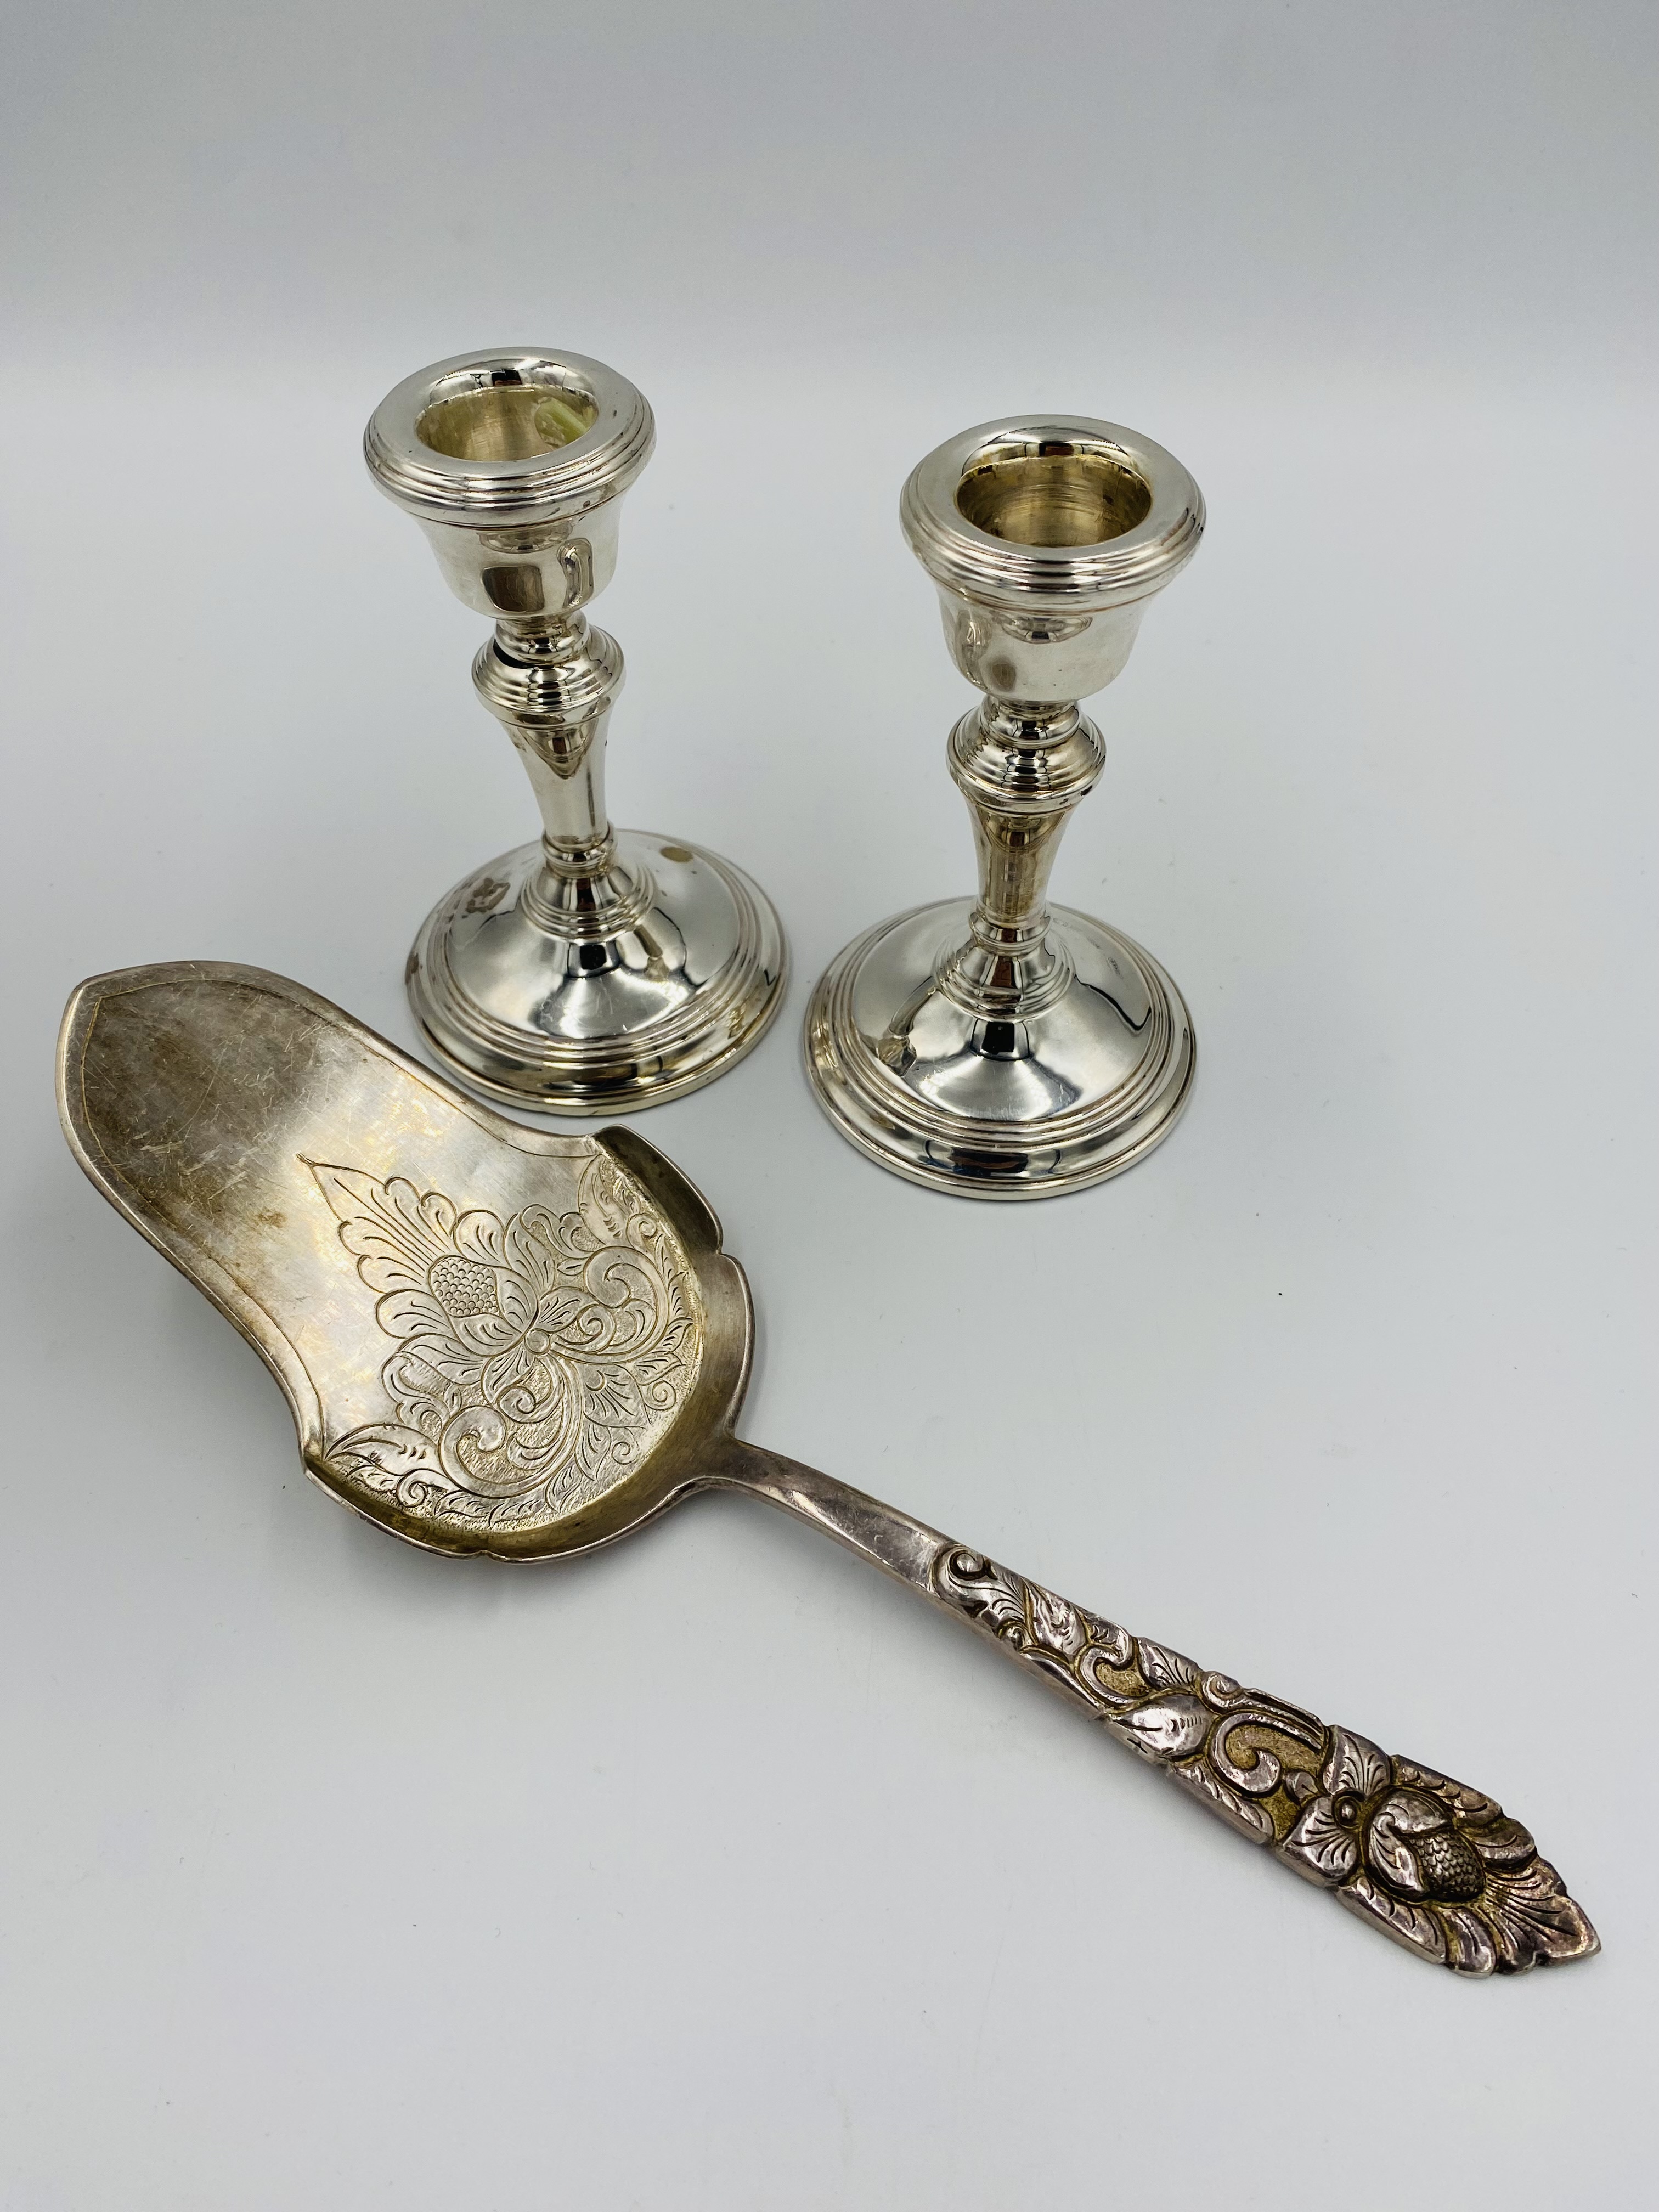 Pair of silver candlesticks together with a silver server - Image 2 of 3